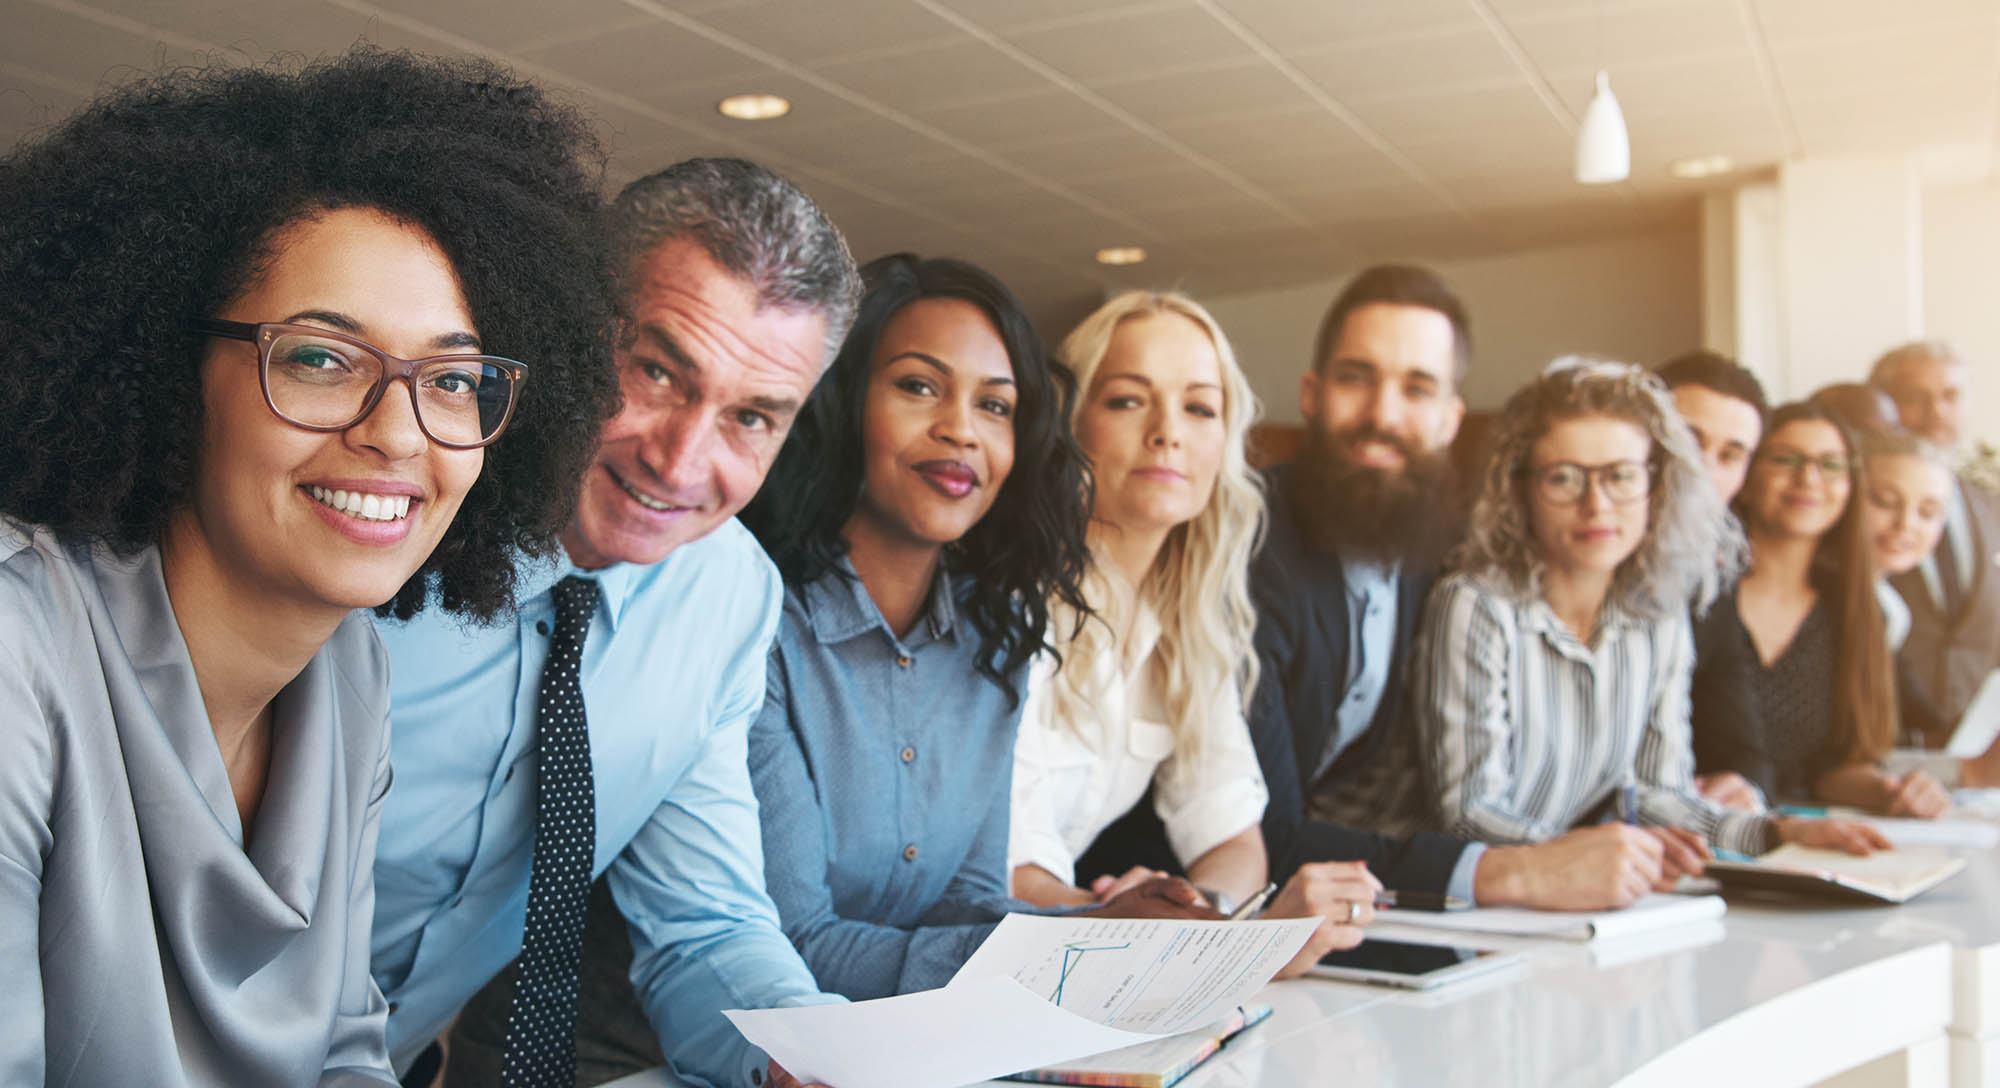 Diversity recruiting in the workplace has been proven to foster innovation and help organizations grow more rapidly. Our services are designed to help employers build the talented, diverse teams they need